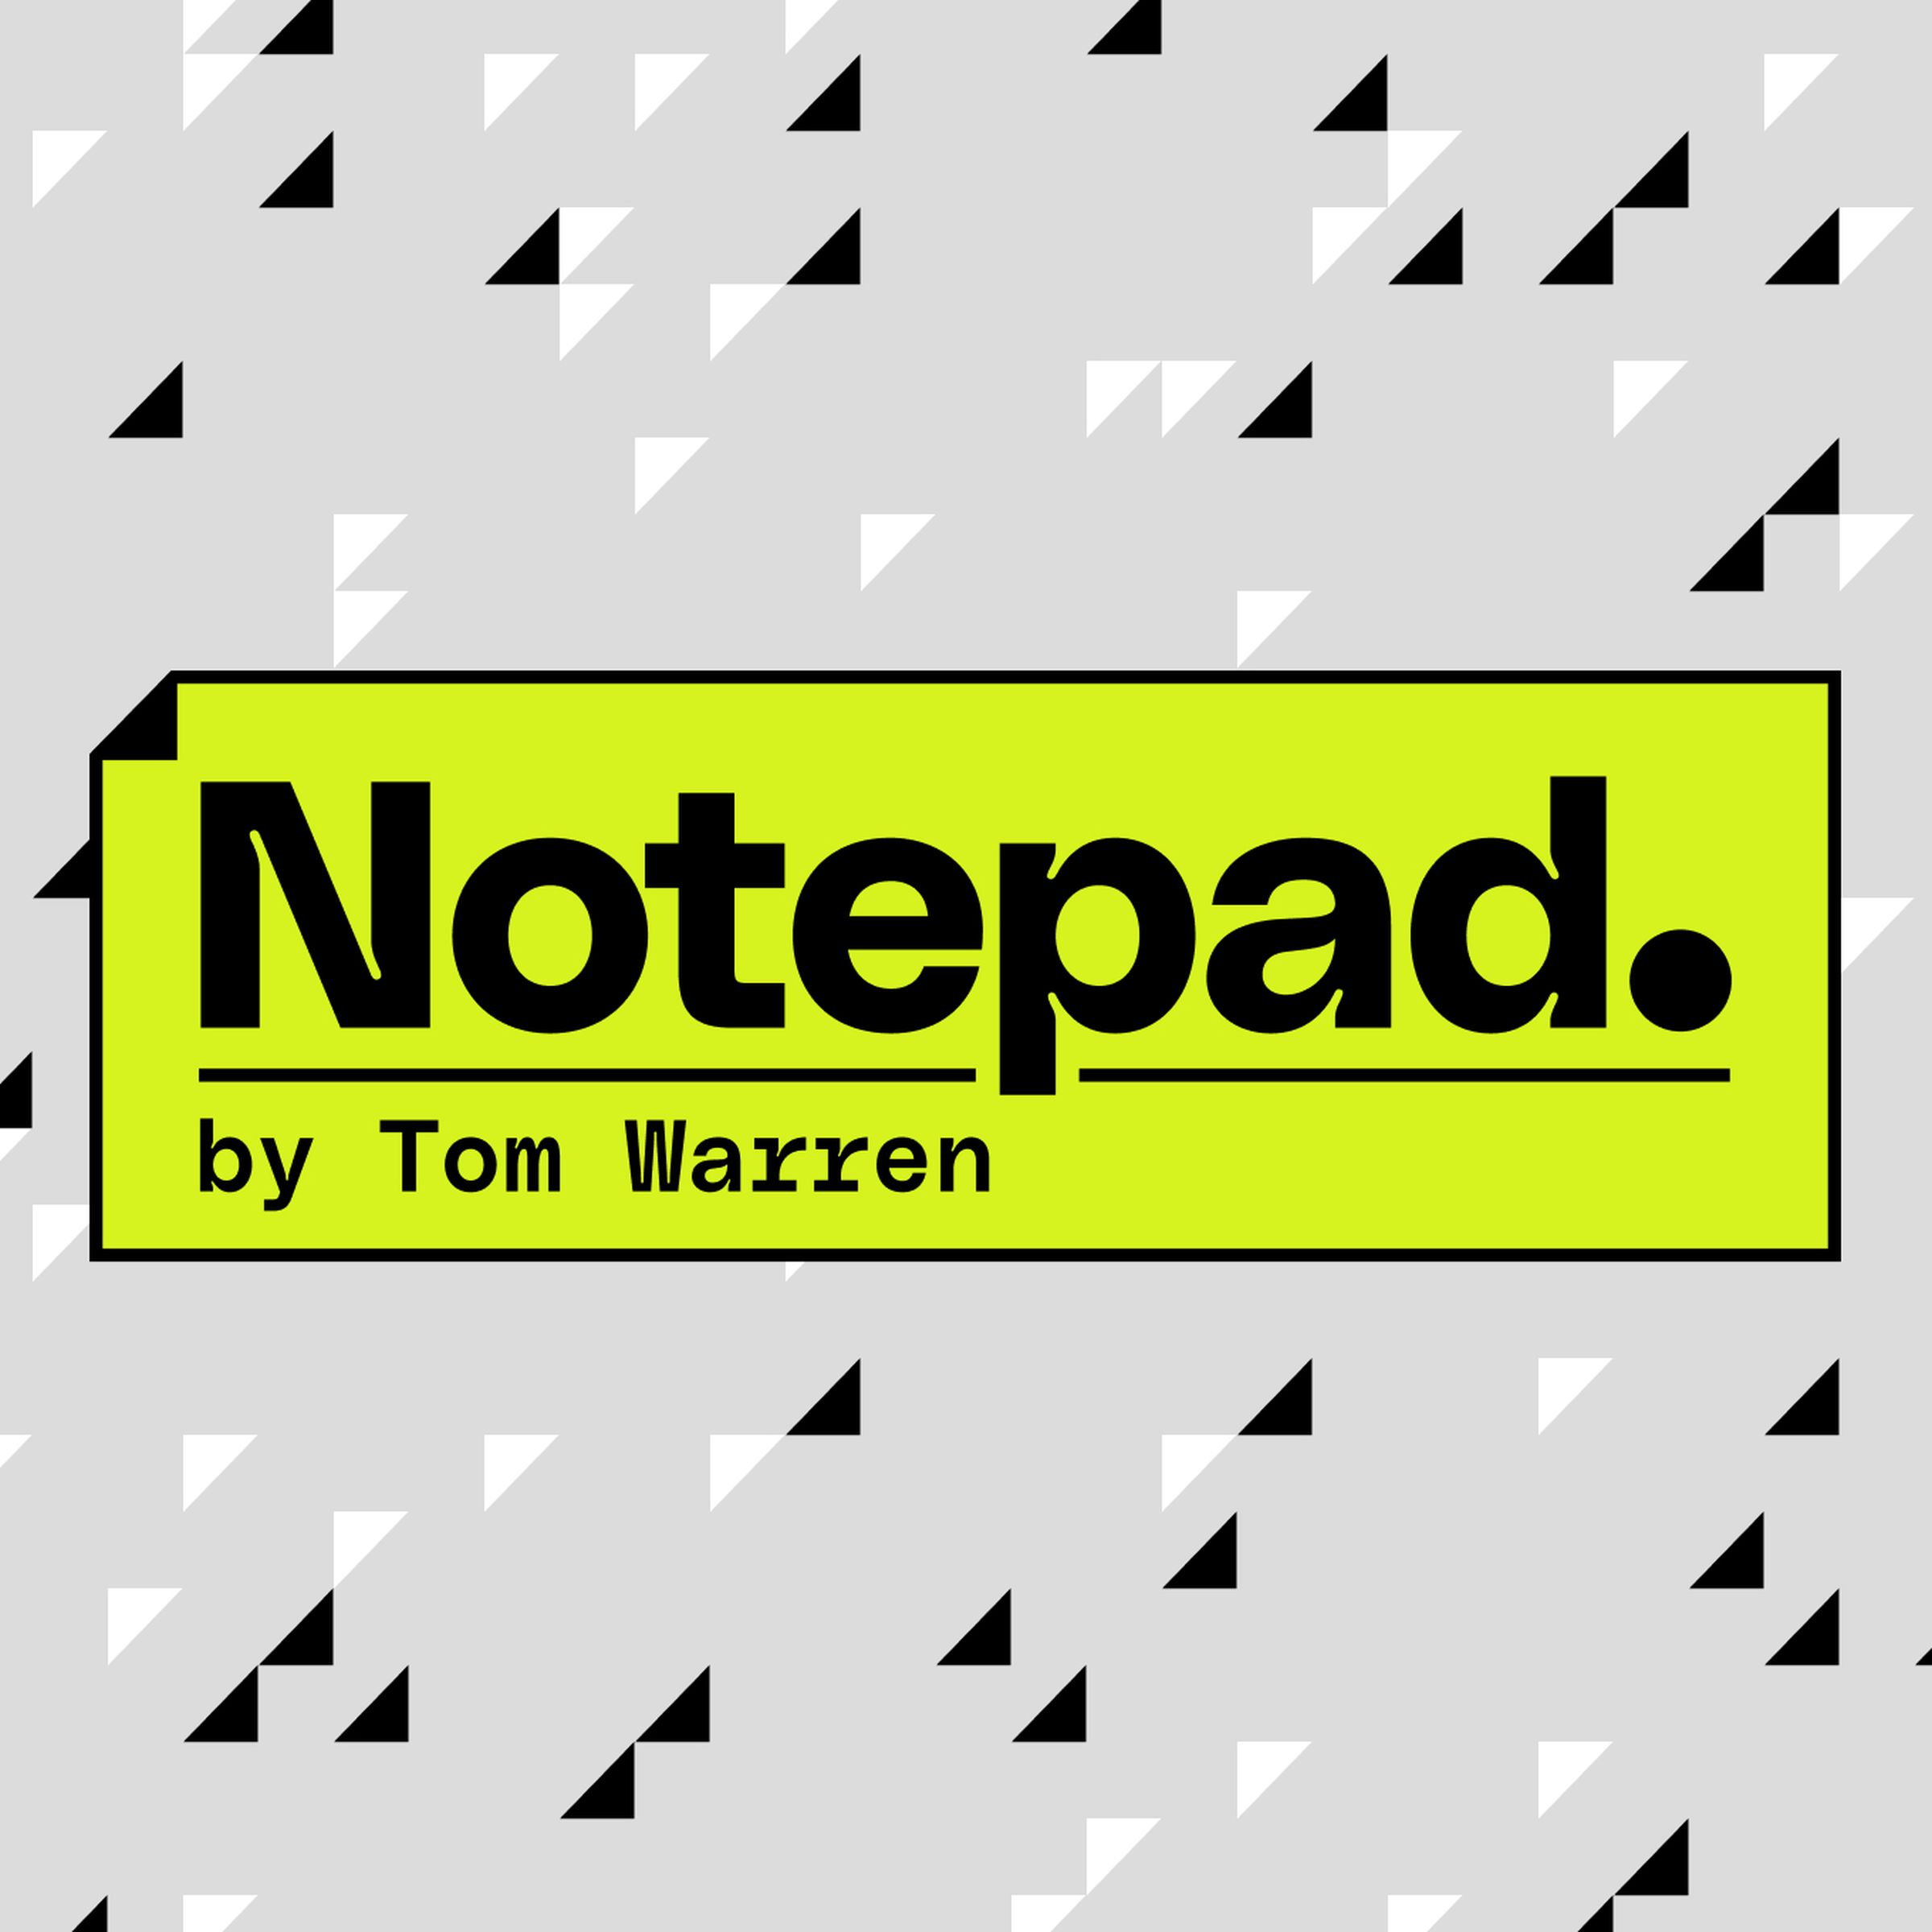 Vector illustration of the logo for Notepad by Tom Warren.